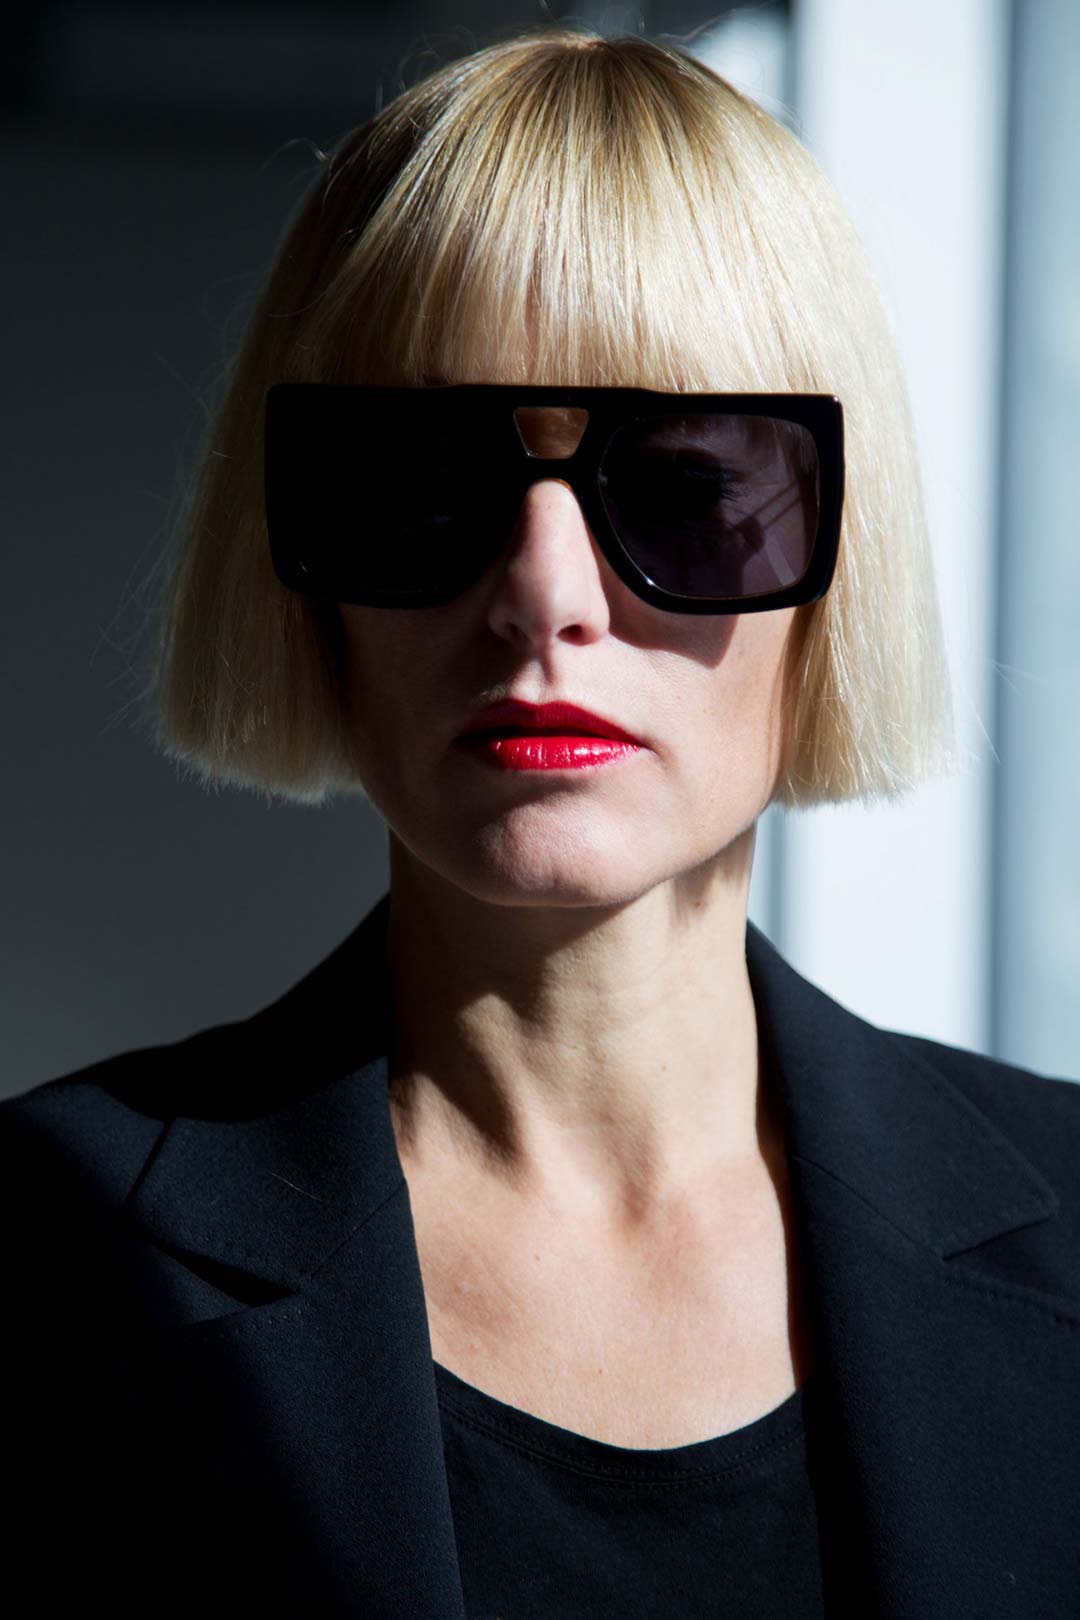 Woman with peroxide white blonde hair wearing square black sunglasses